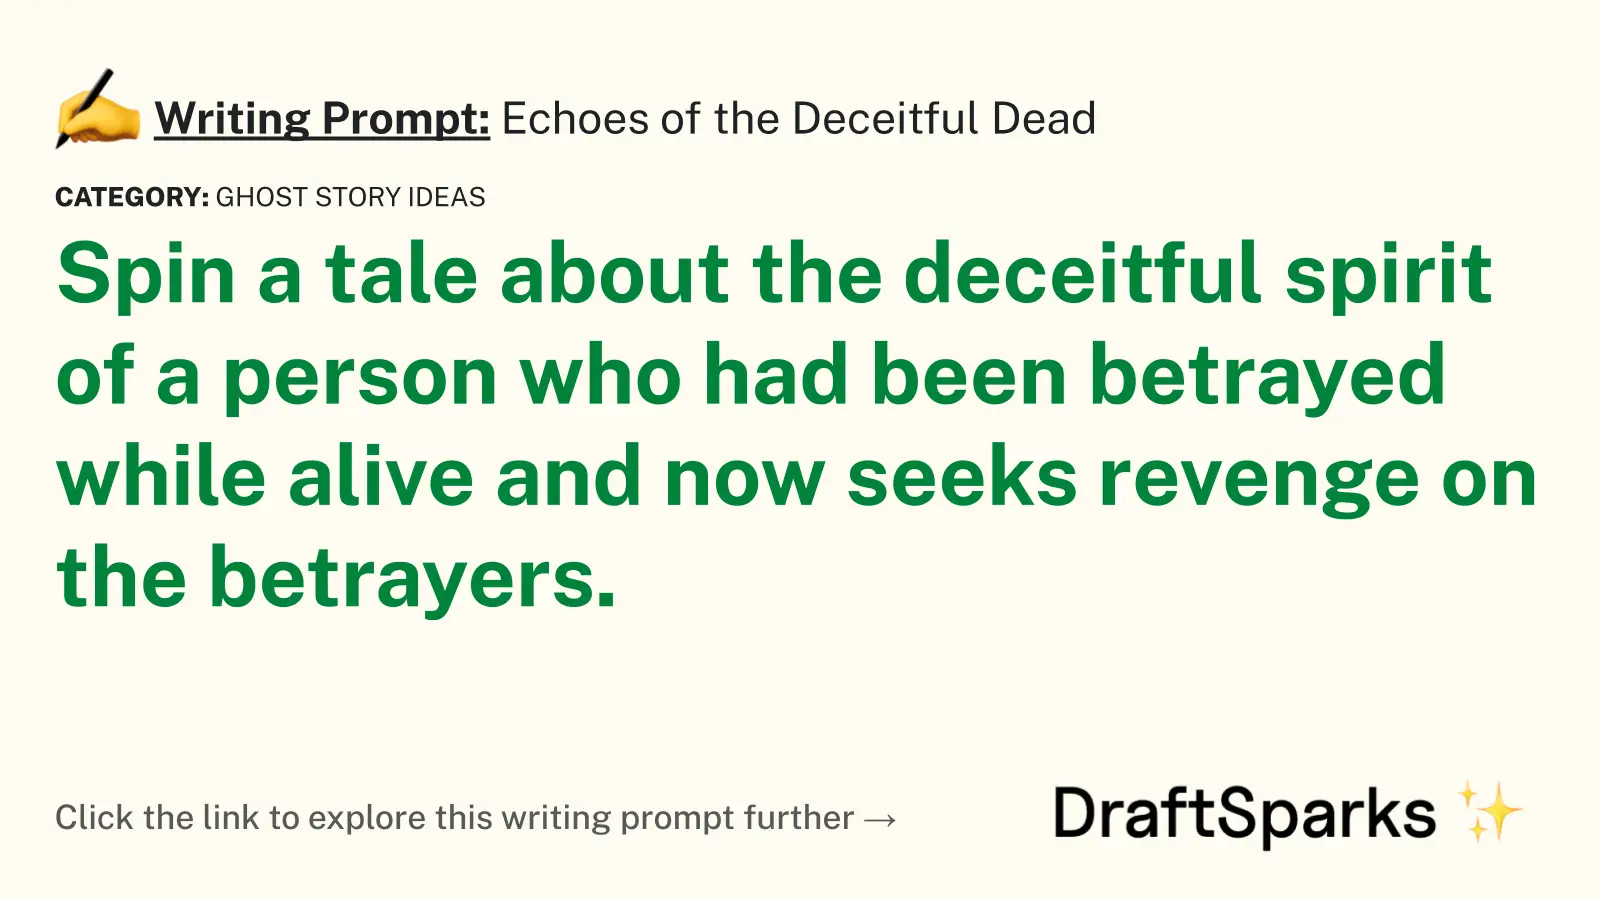 Echoes of the Deceitful Dead